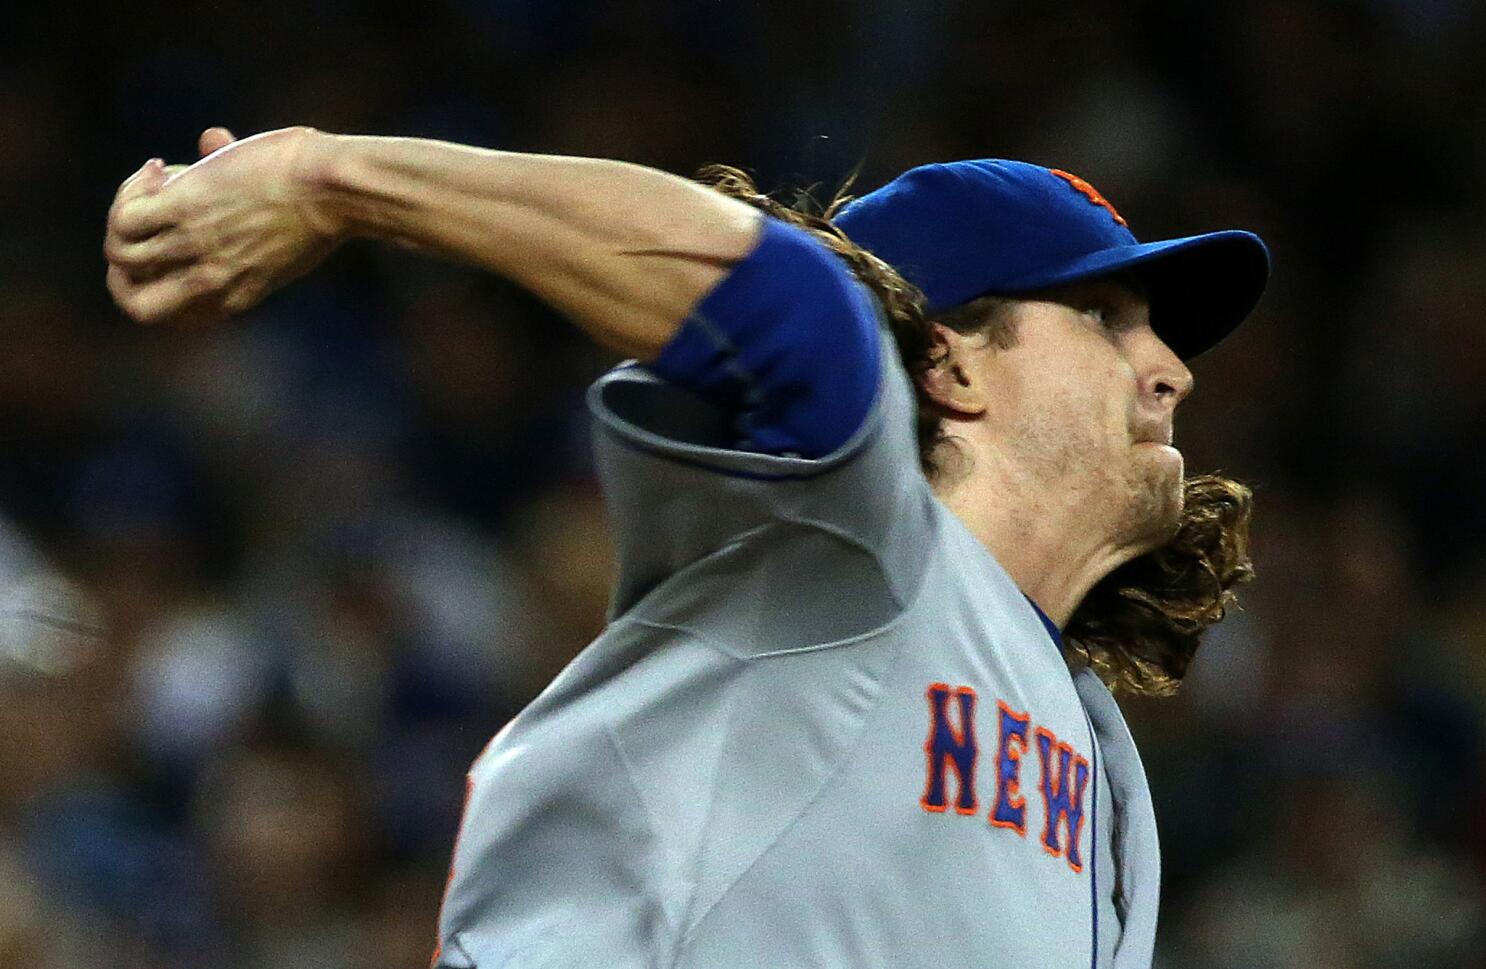 Mets Place Jacob deGrom on Injured List With Sore Elbow - The New York Times